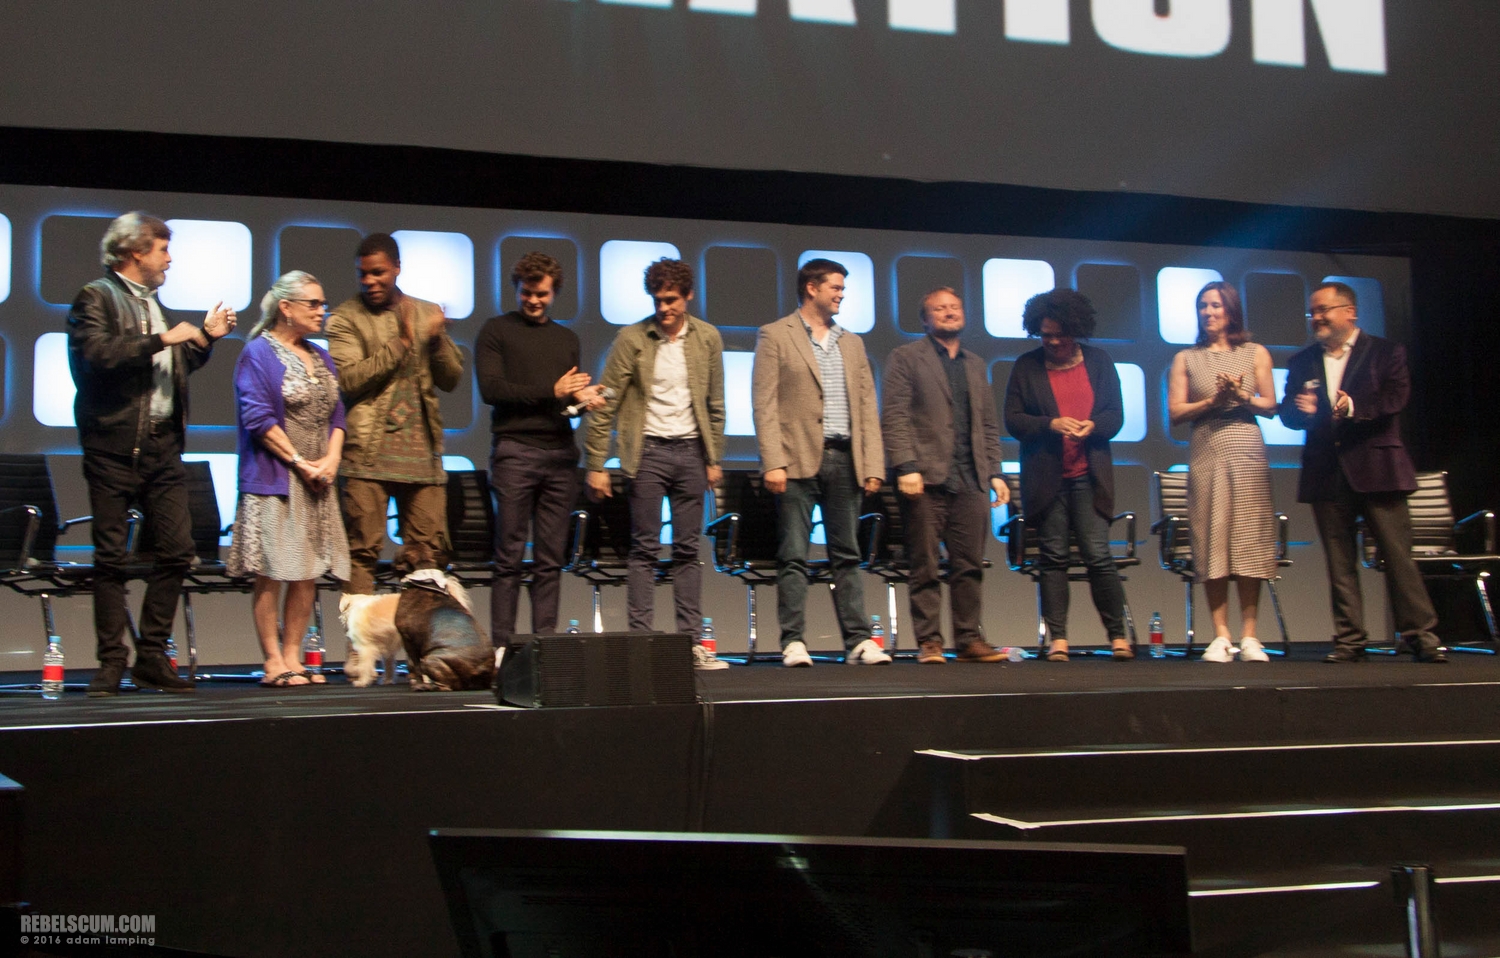 star-wars-celebration-2016-future-filmmakers-and-closing-ceremony-032.jpg